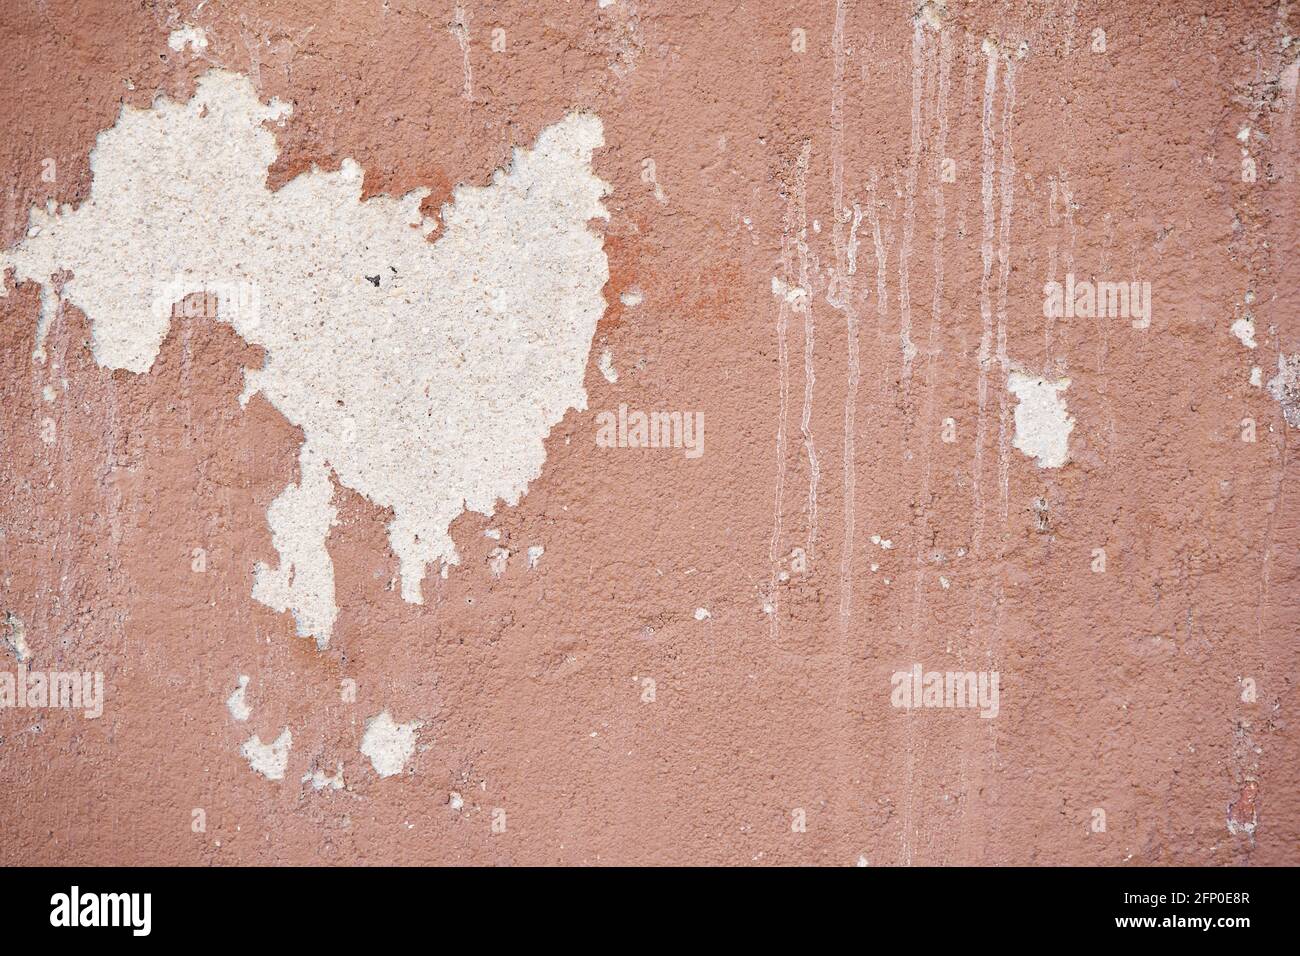 Horizontal photograph of the Abstract texture of terracotta painted stucco wall with peeling paint. Stock Photo